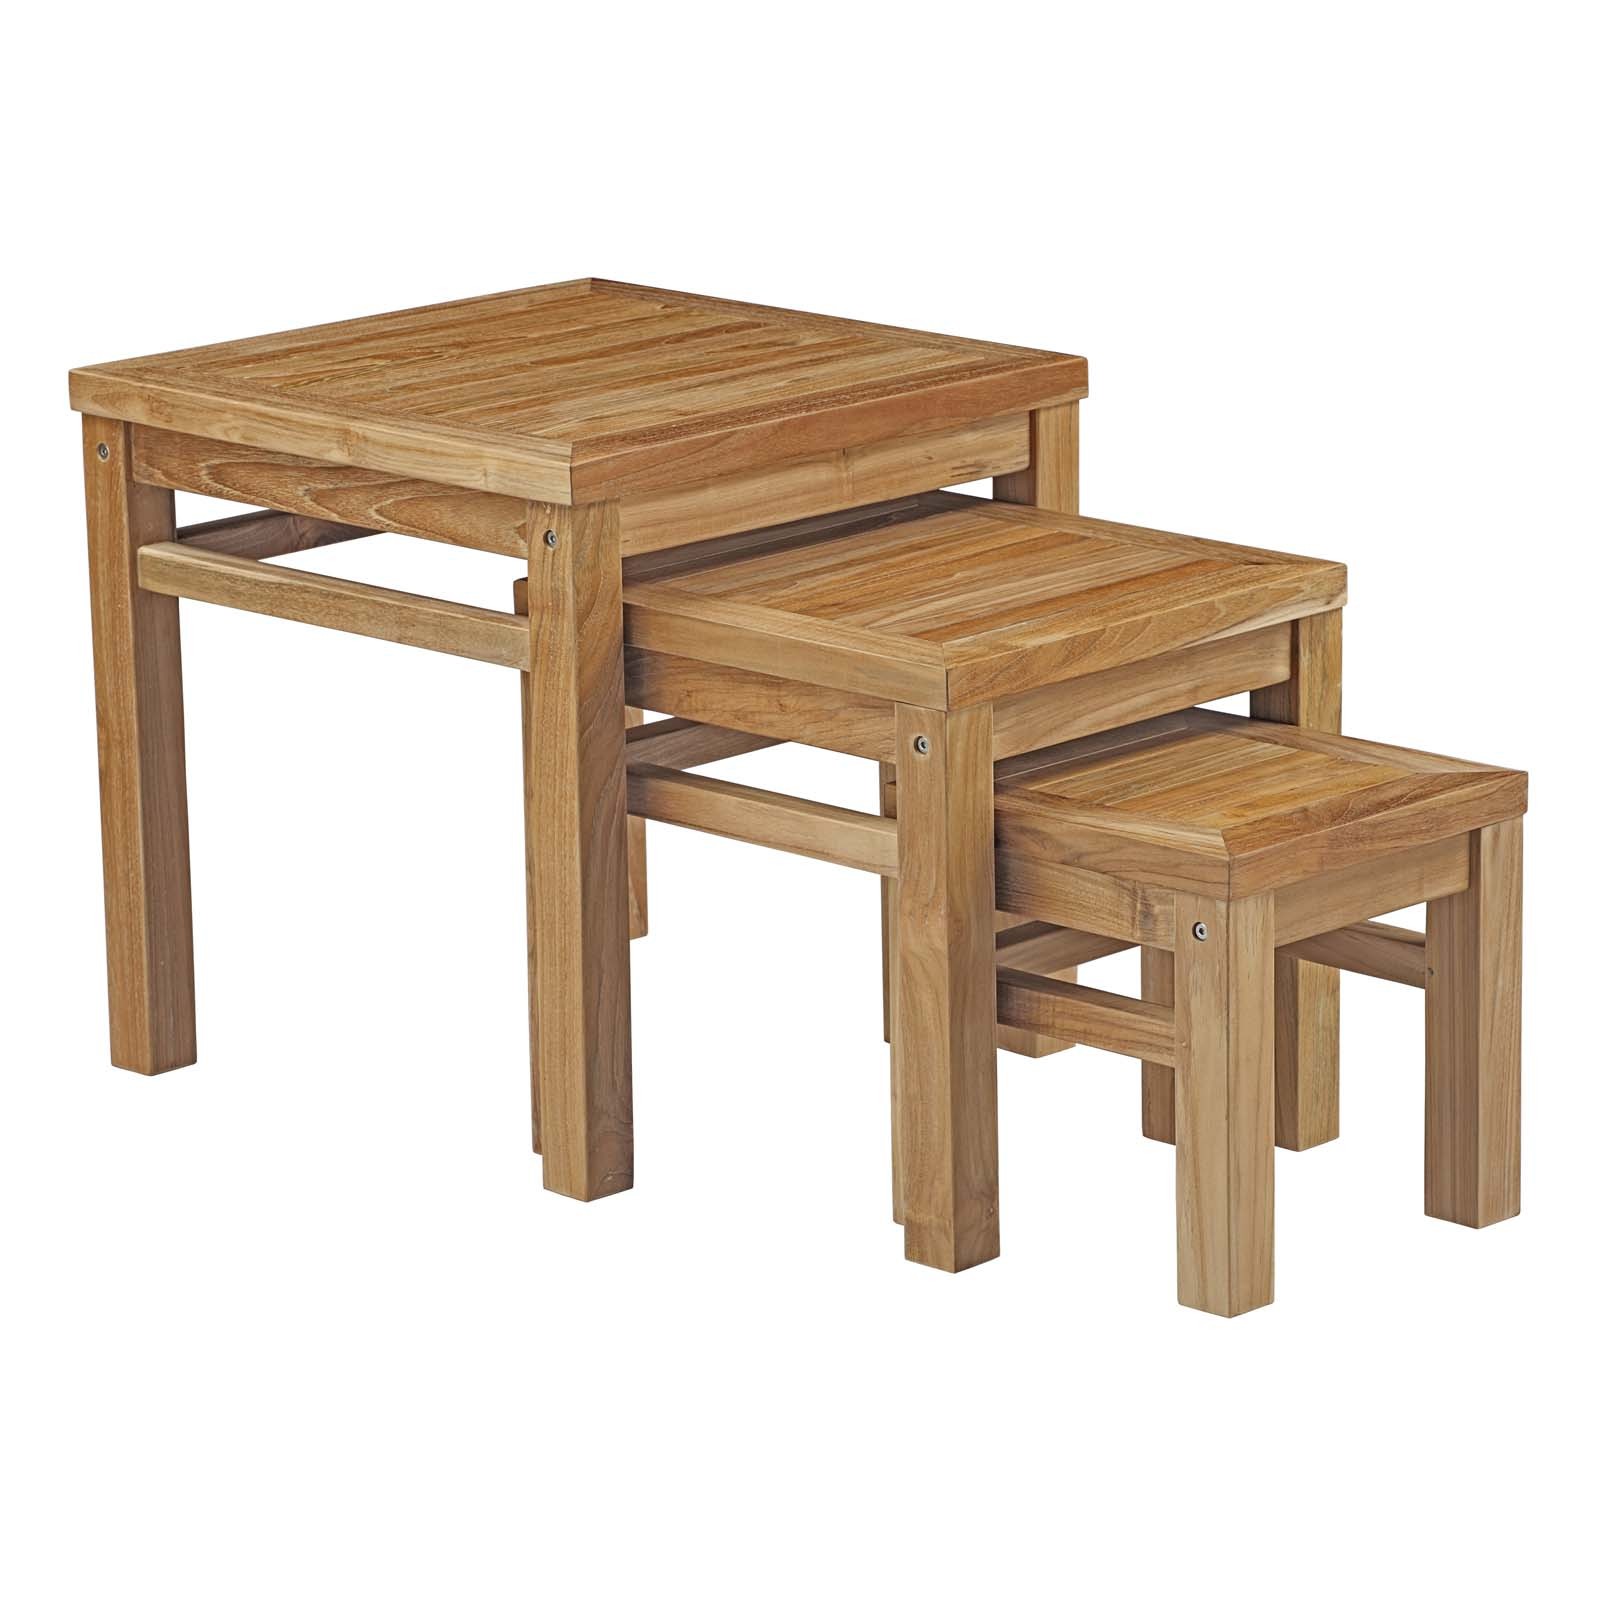 Marina Outdoor Patio Teak Nesting Table in Natural